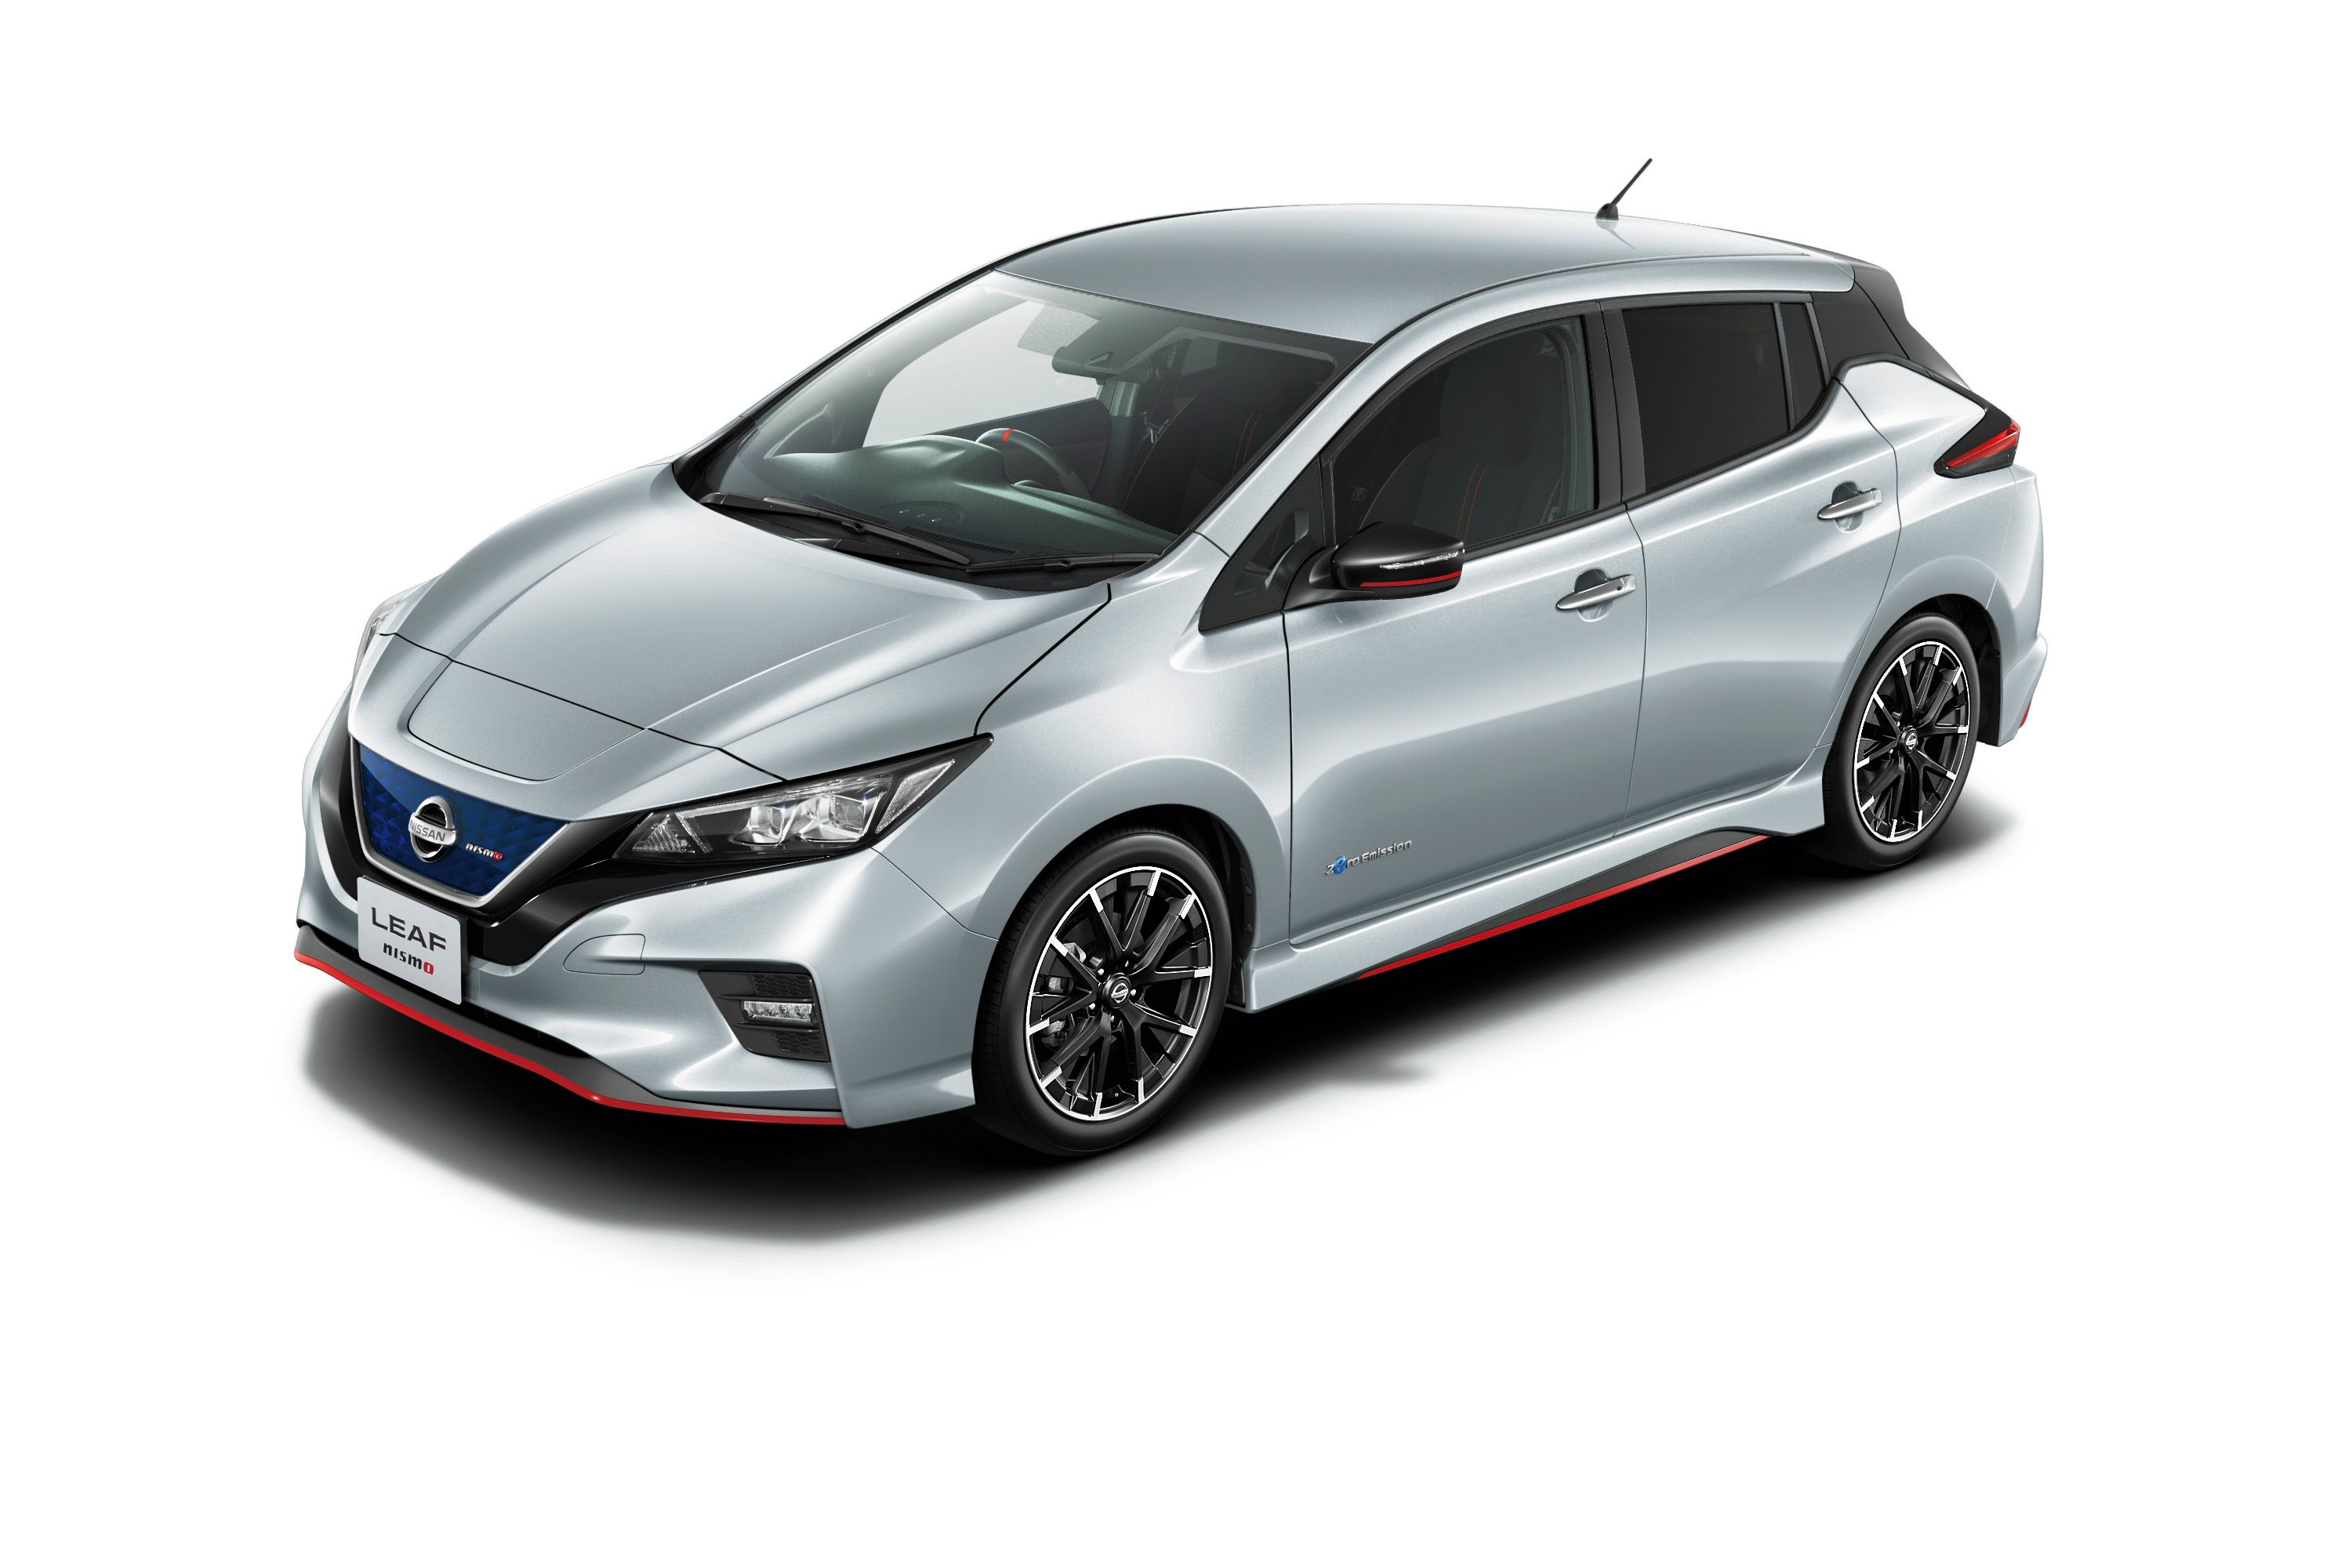 2019 - 2018 The Nissan Leaf Nismo Has Been Unveiled, But It May Leave You Disappointed